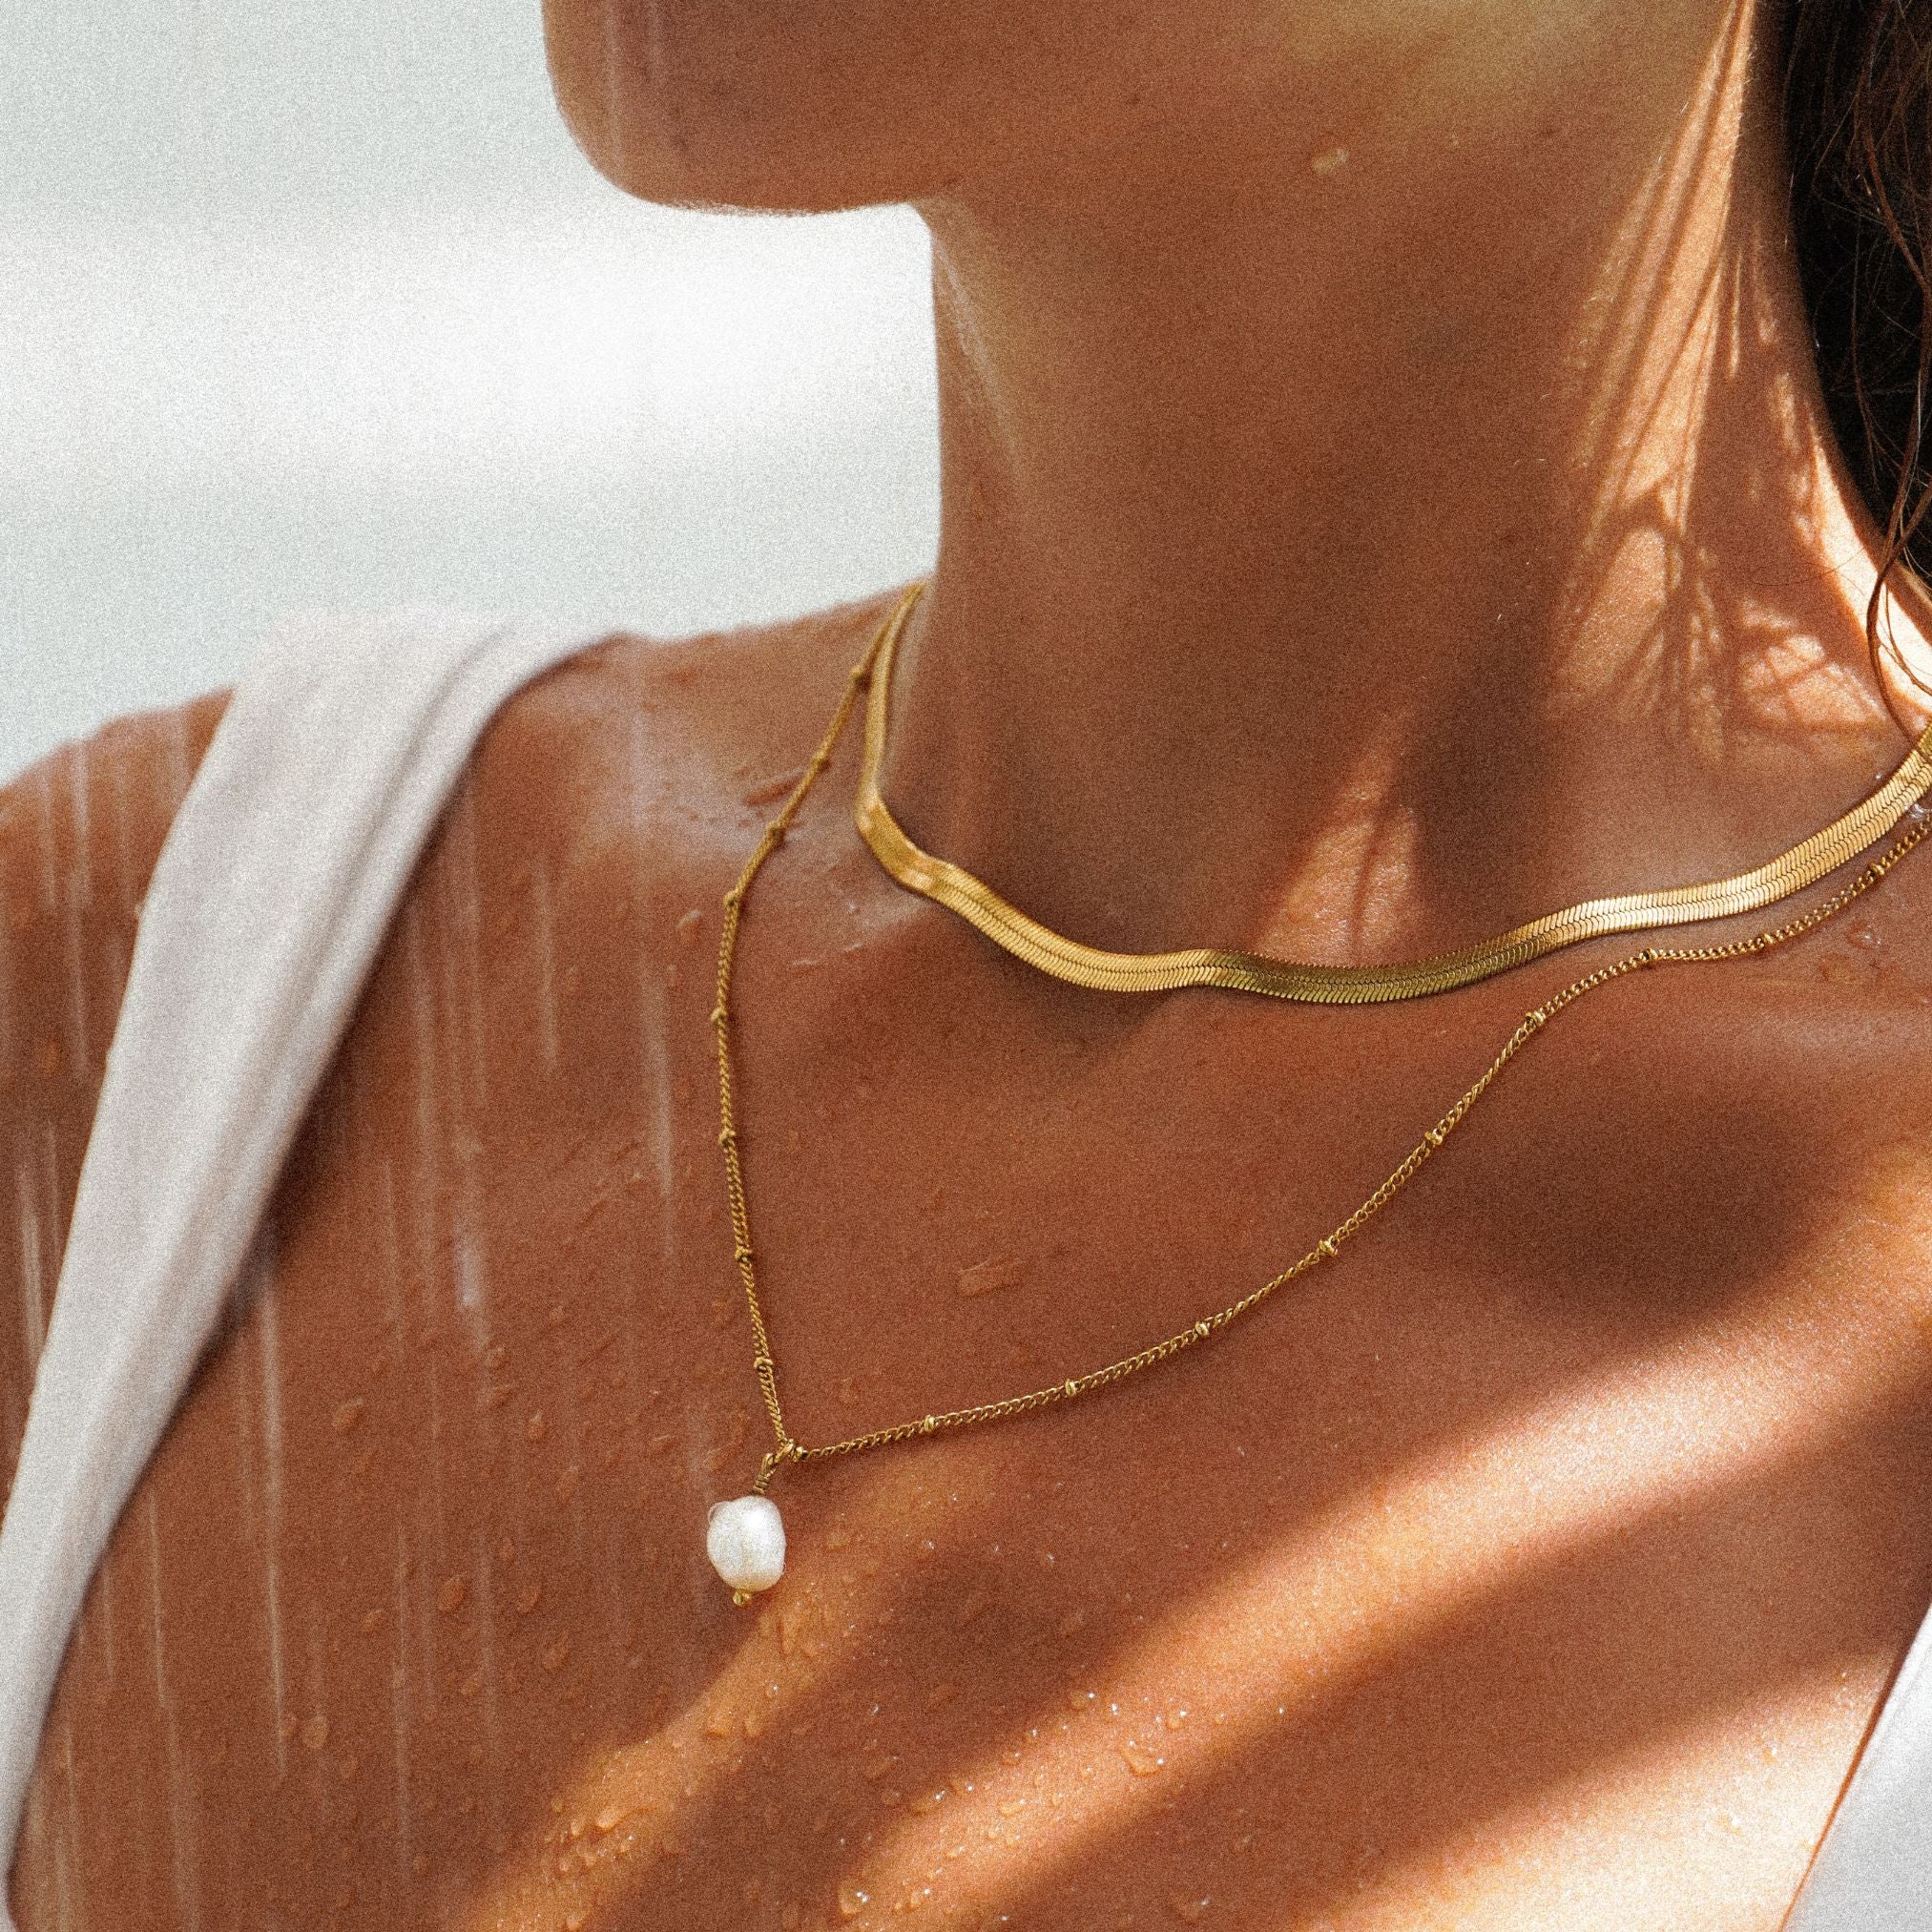 Jewelry You Can Shower With